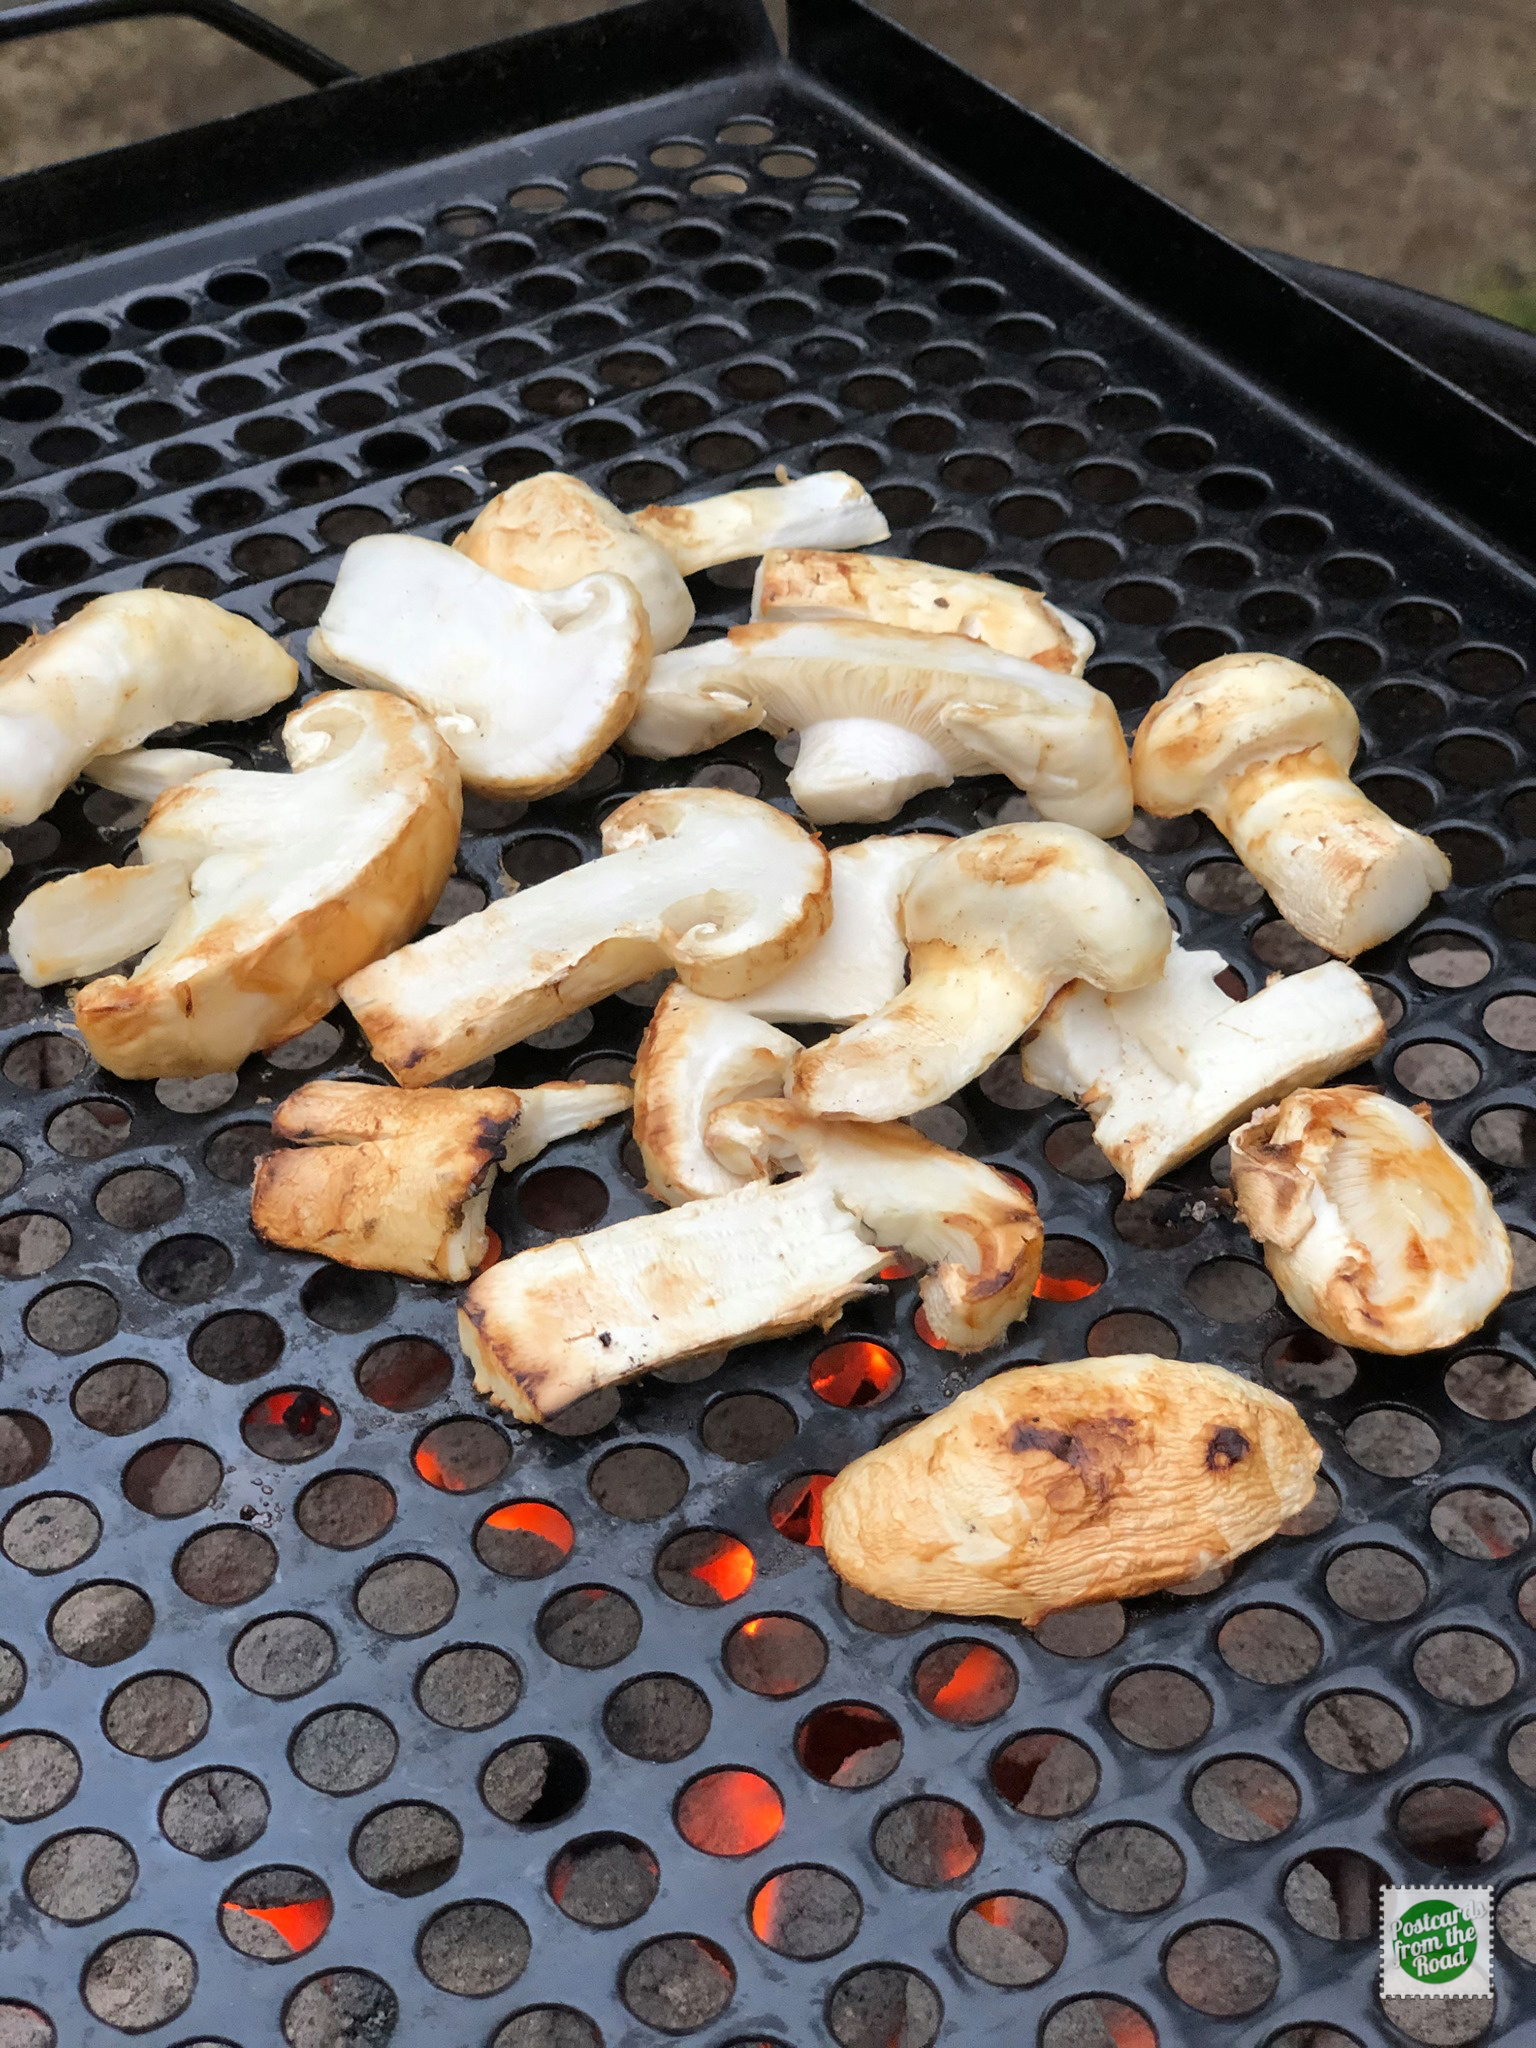 On our hike, we found a few choice matsutake mushrooms. This evening we sliced them up and grilled them on our Weber Little Smokey along with a couple of burgers. Yum! It’s now campfire time.